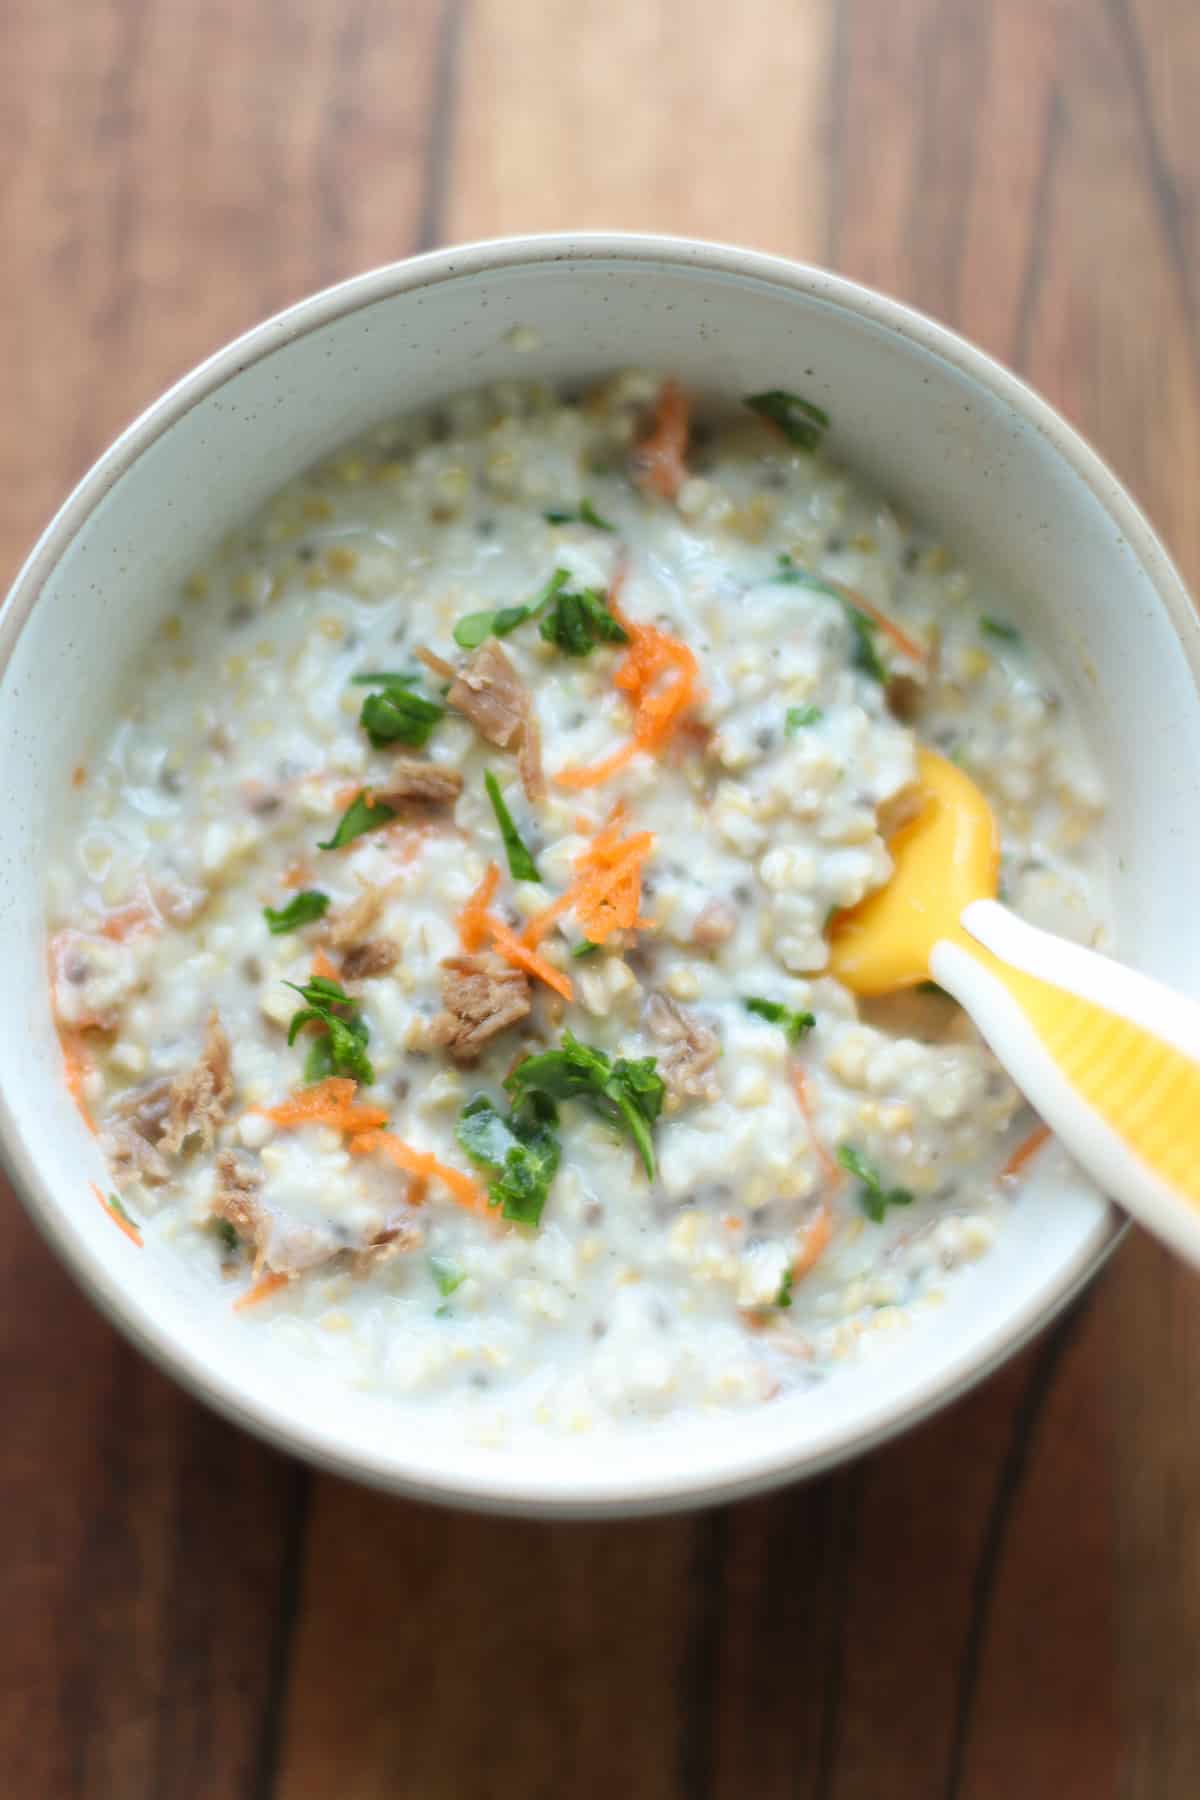 Savory overnight steel cut oats with carrots, spinach, and finely minced beef.